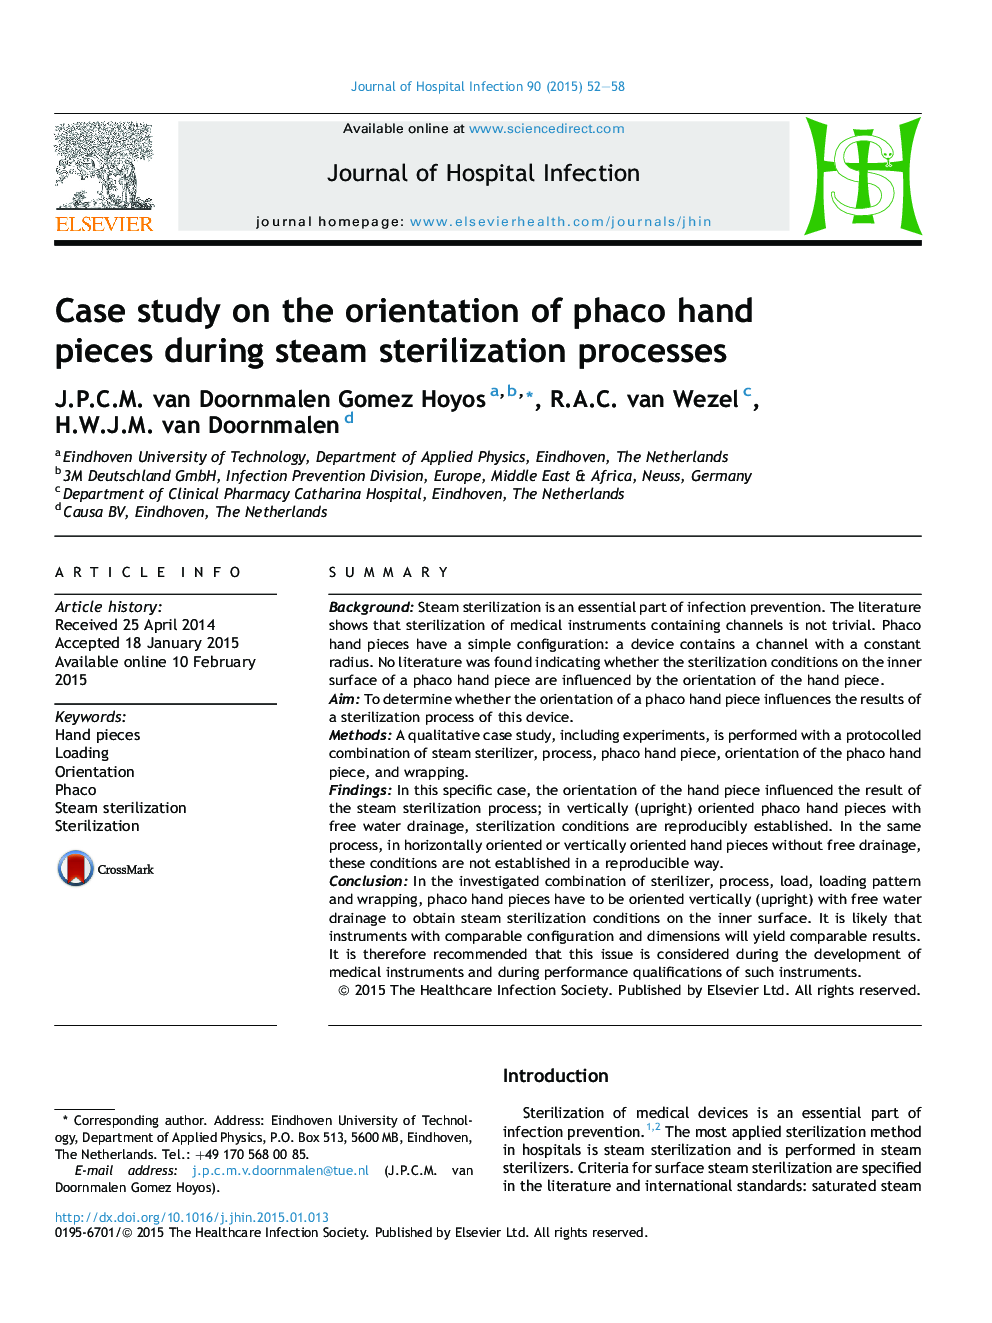 Case study on the orientation of phaco hand piecesÂ during steam sterilization processes